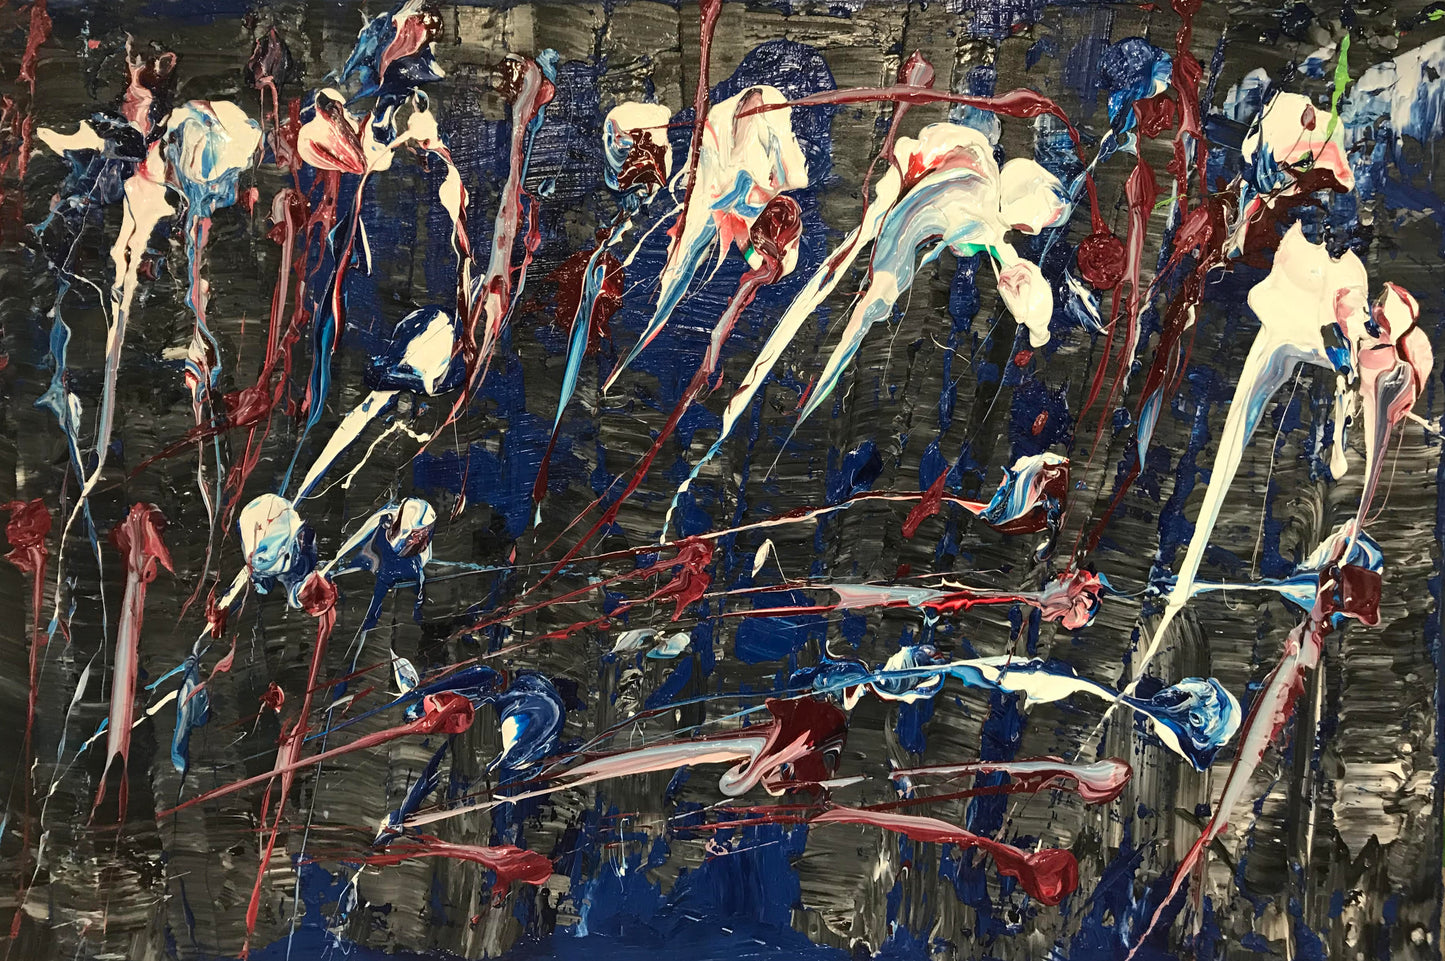 Untitled #4, 20"x40" Oil On Canvas, Sold 2018